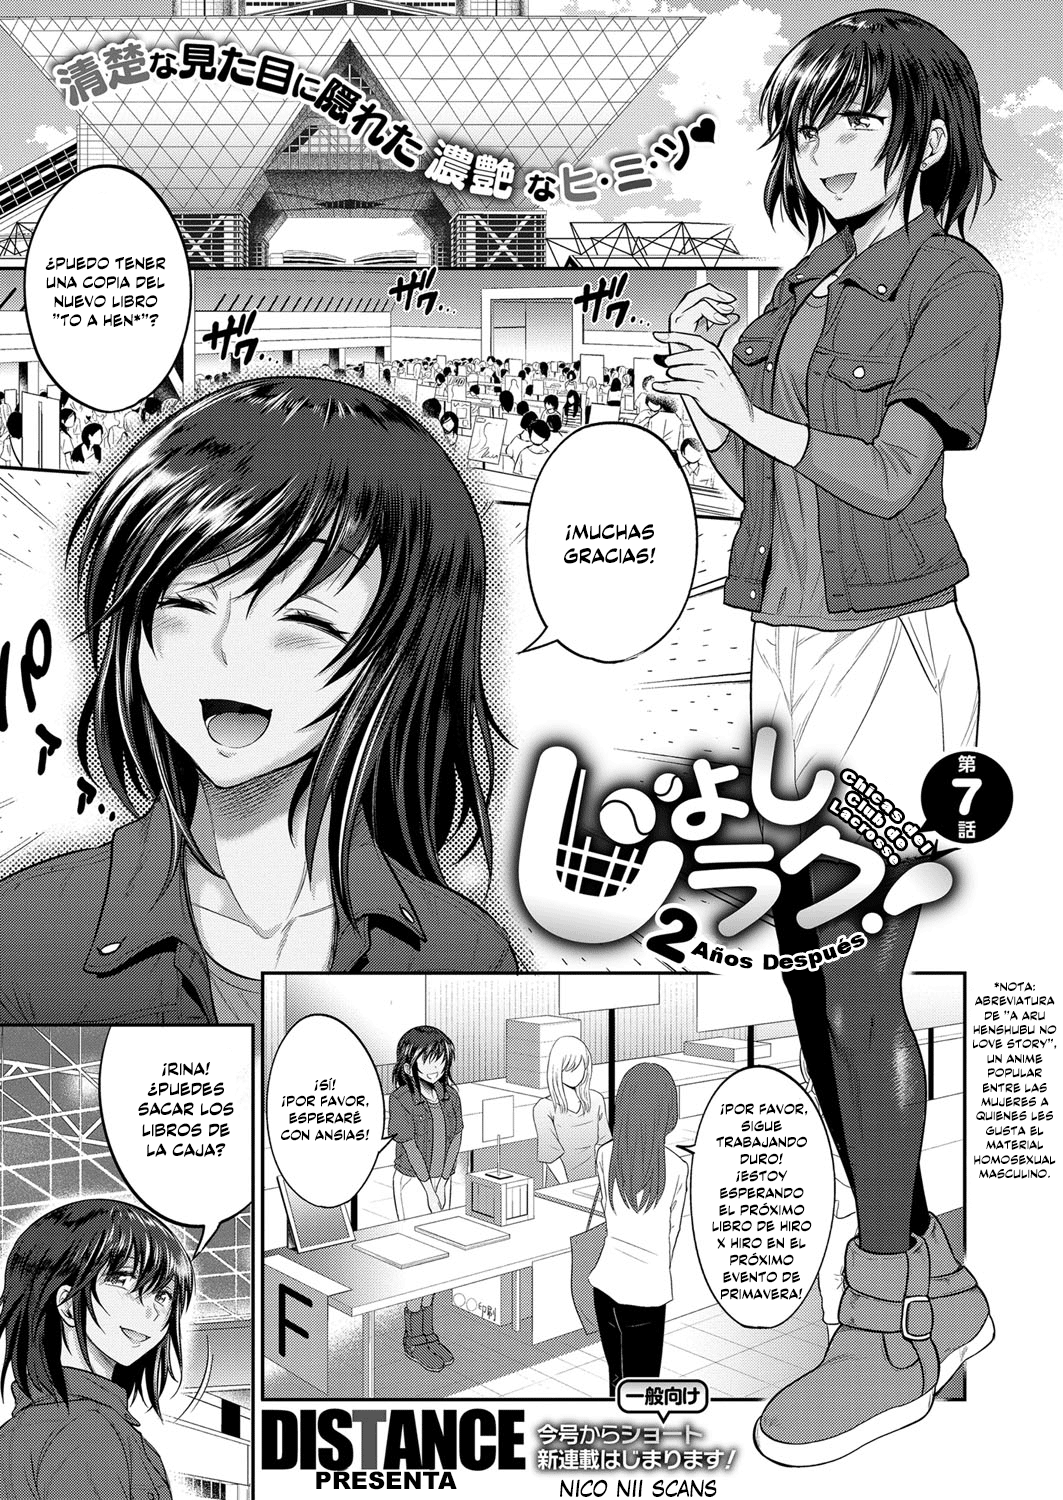 [DISTANCE] Joshi Lacu! - Girls Lacrosse Club ~2 Years Later~ Ch.07 (COMIC ExE 11) [Español] [NicoNiiScans] [Digital] [DISTANCE] じょしラク! ～2 Years Later～ 第7話 (コミック エグゼ 11) [スペイン翻訳] [DL版]